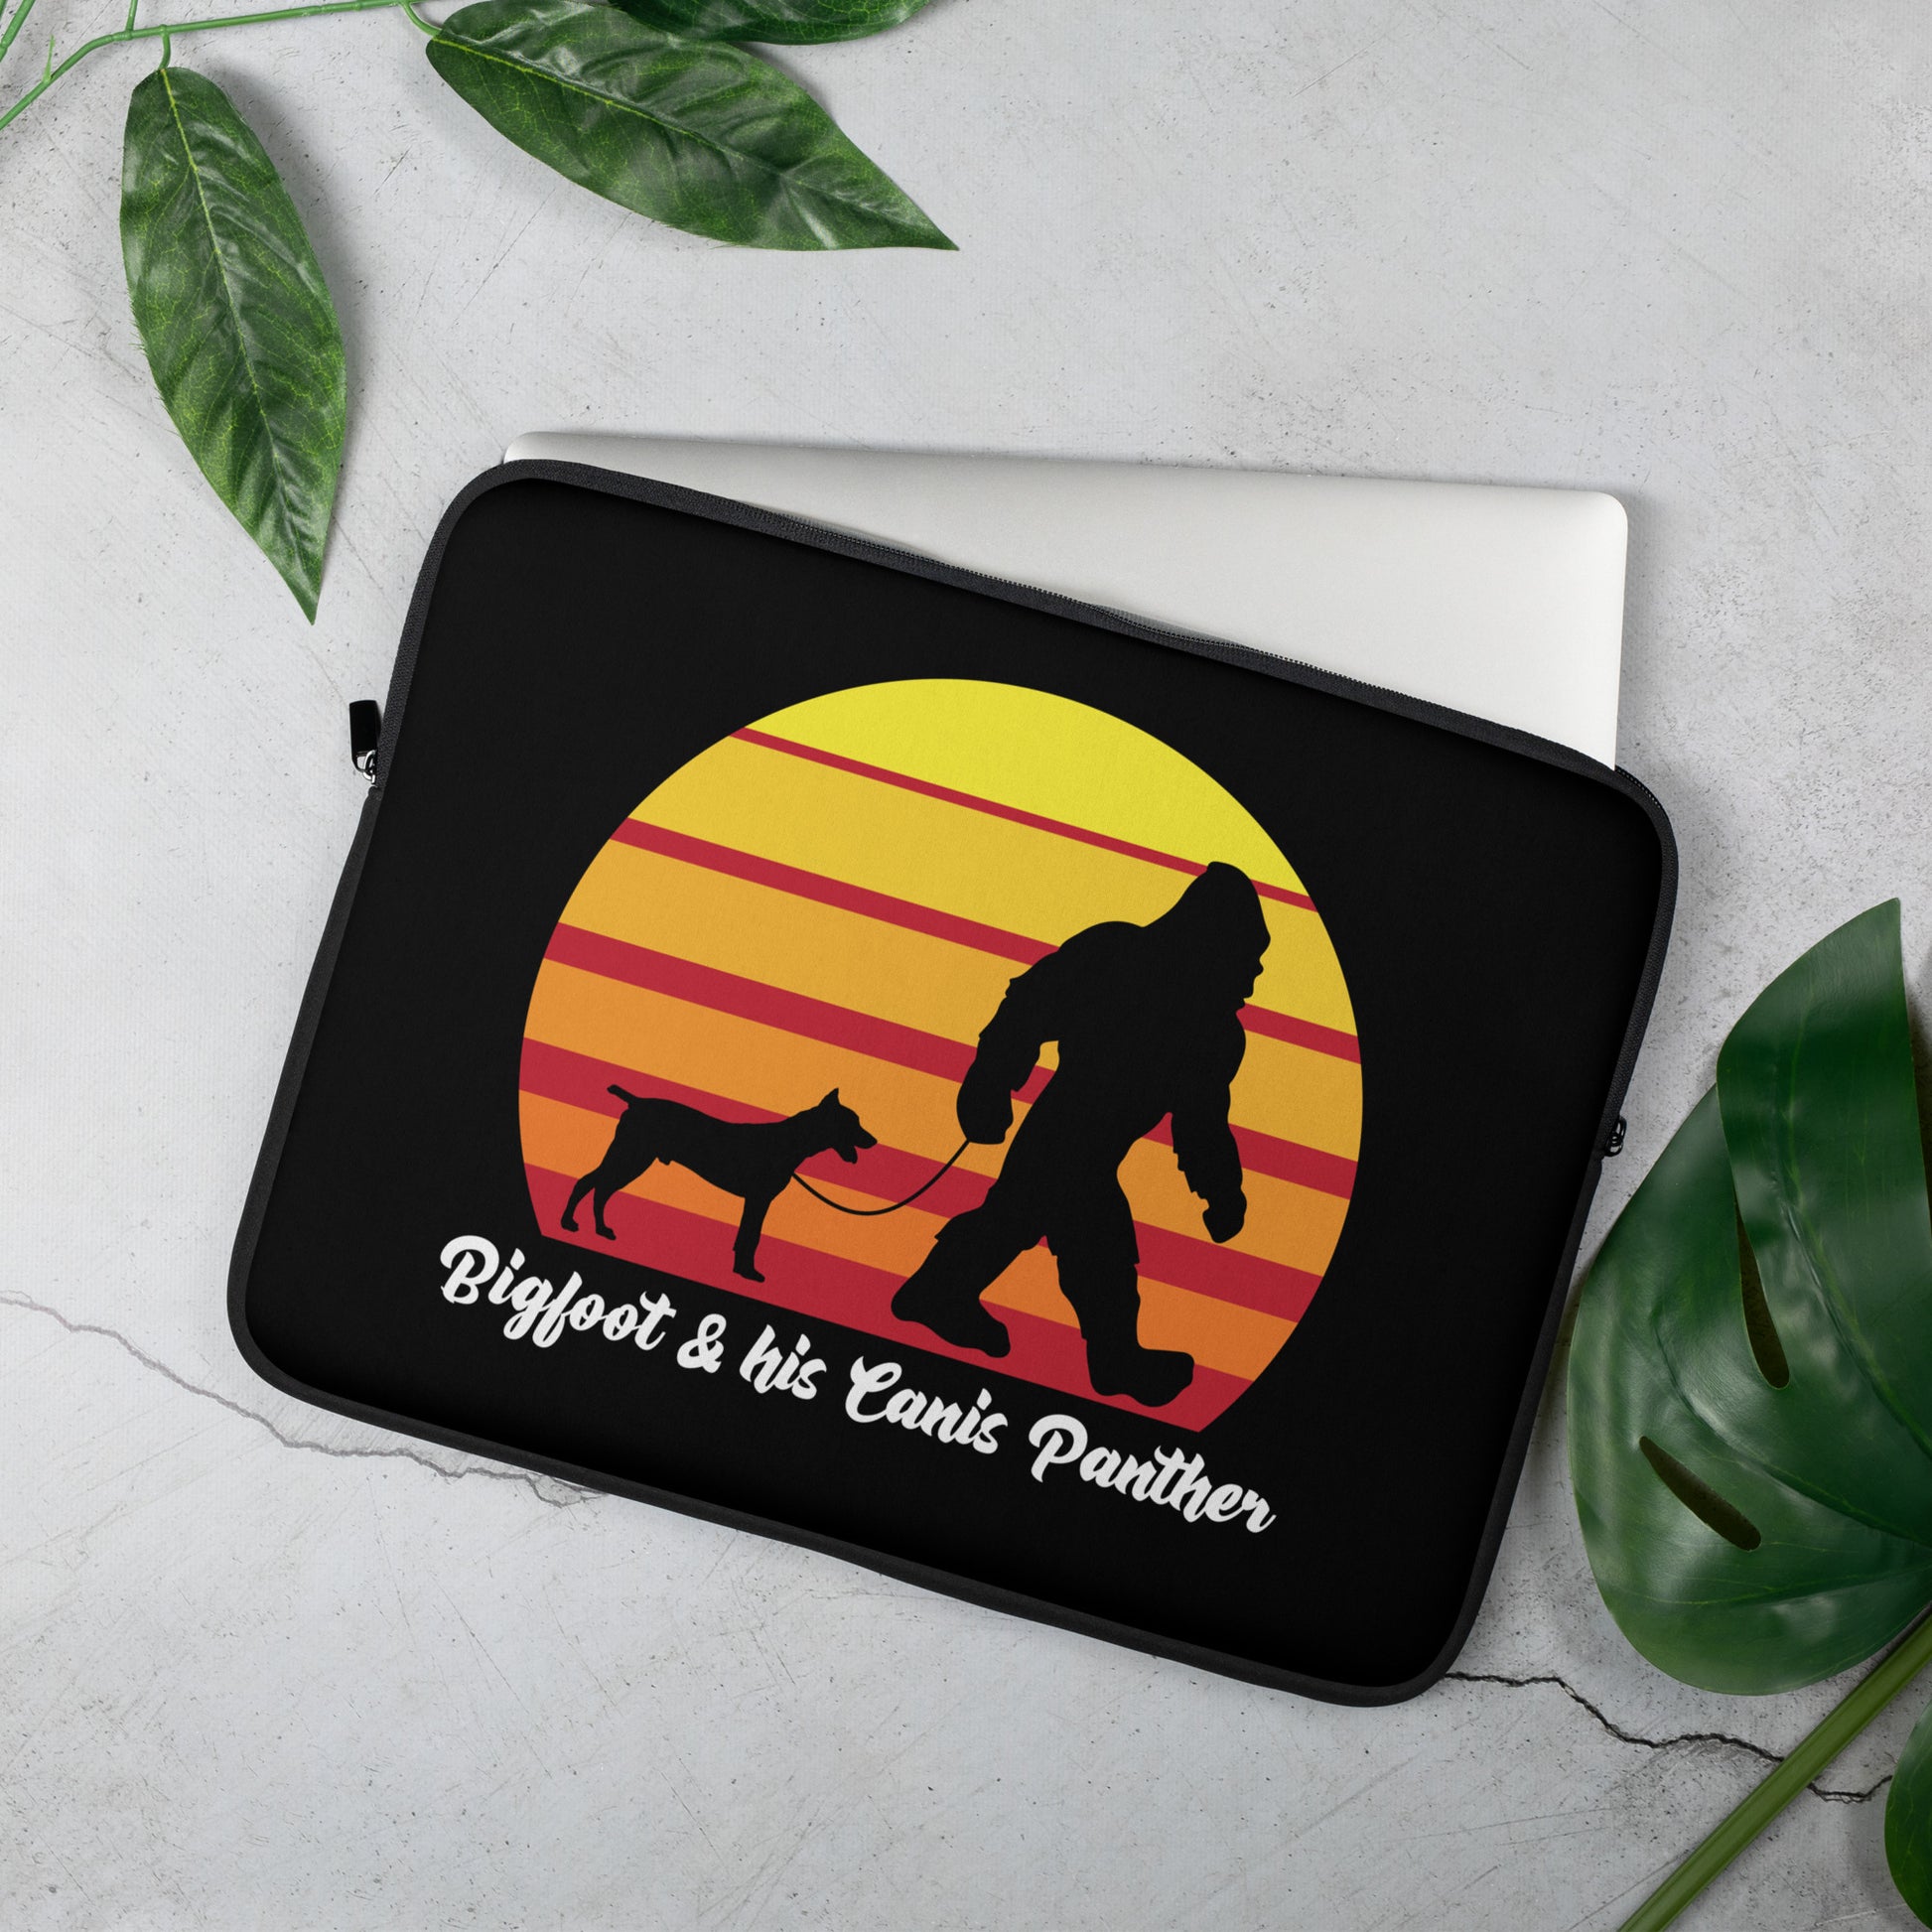 Bigfoot and his Canis Panther Laptop Sleeve by Dog Artistry.